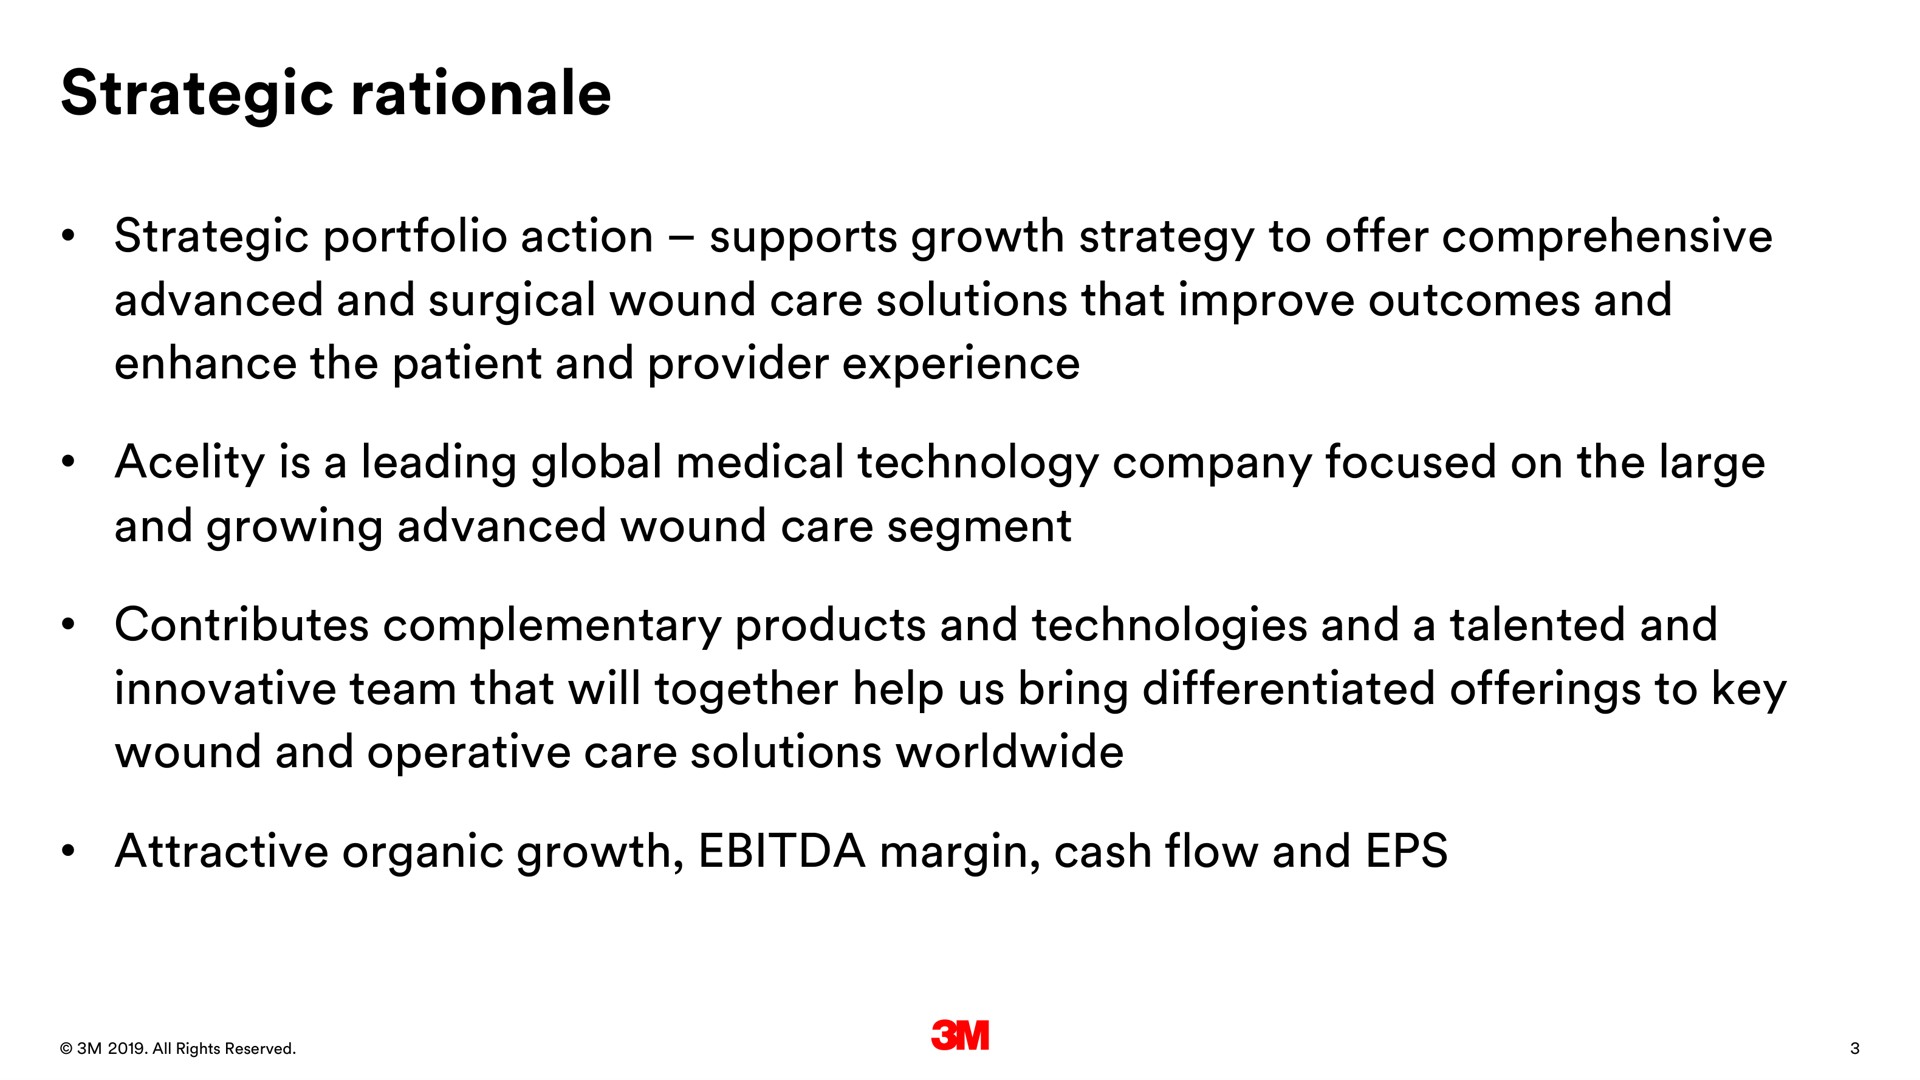 strategic rationale strategic portfolio action supports growth strategy to offer comprehensive advanced and surgical wound care solutions that improve outcomes and enhance the patient and provider experience is a leading global medical technology company focused on the large and growing advanced wound care segment contributes complementary products and technologies and a talented and innovative team that will together help us bring differentiated offerings to key wound and operative care solutions attractive organic growth margin cash flow and | 3M